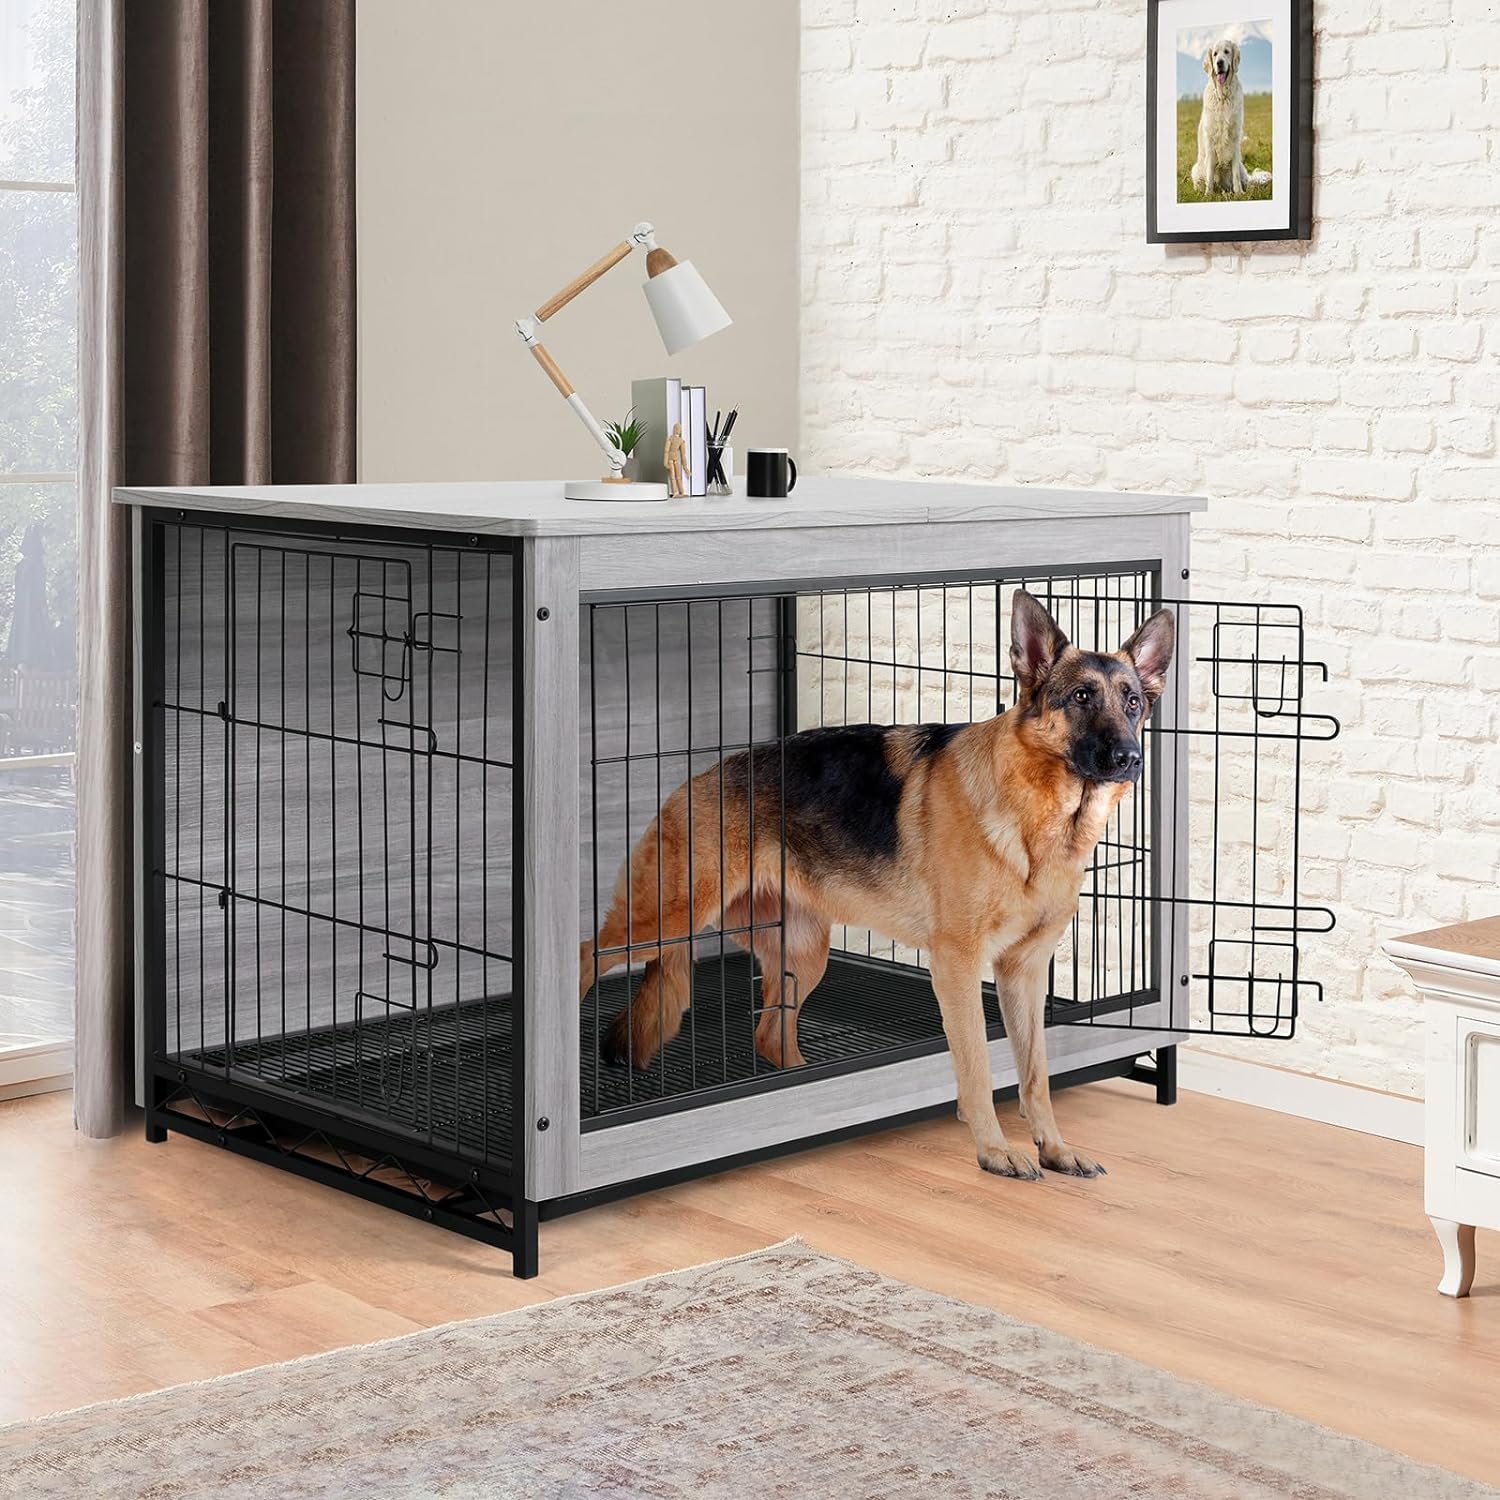 TLSUNNY Dog Crate Furniture Review